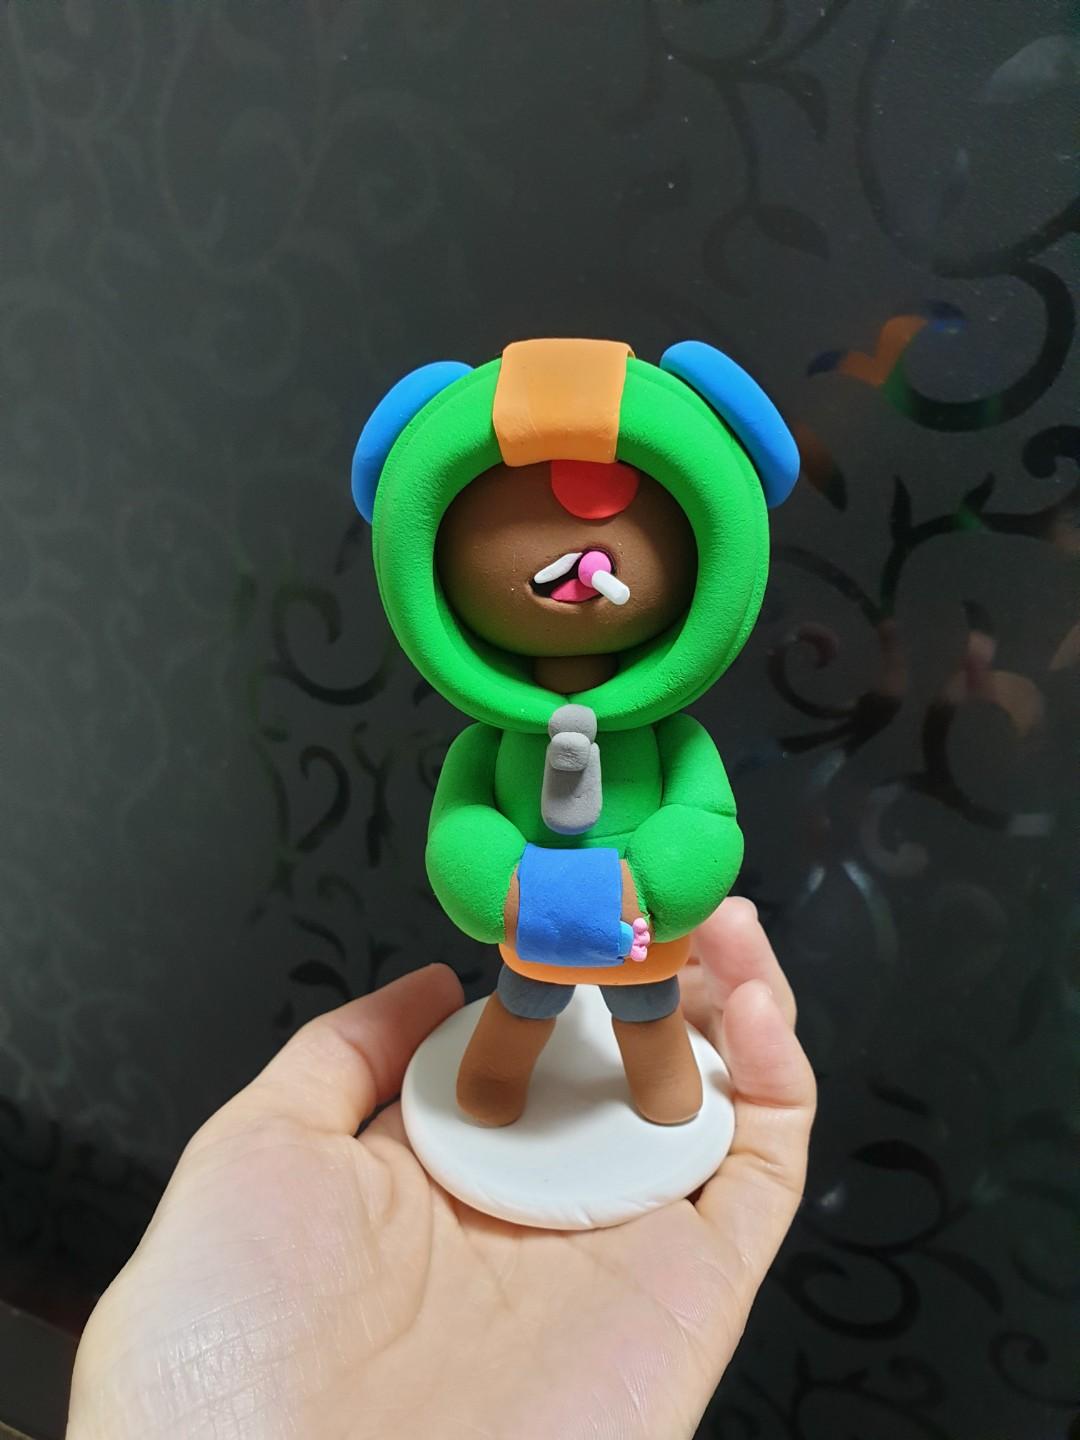 Leon Brawl Stars Cake Topper Air Dry Clay Hobbies Toys Stationery Craft Occasions Party Supplies On Carousell - brawl stars topper cake